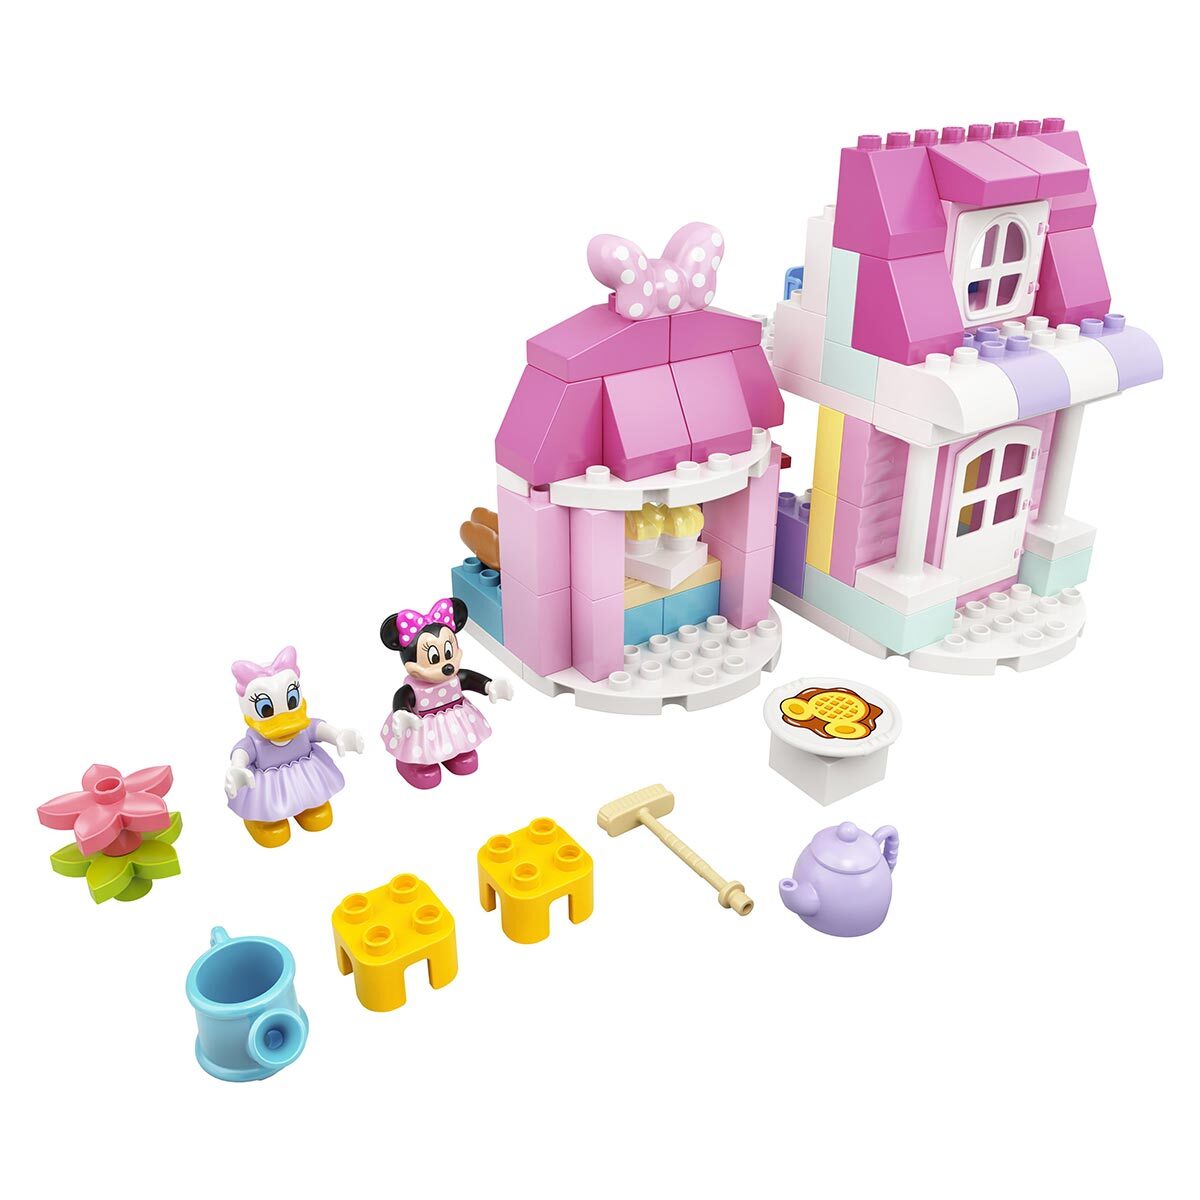 Buy LEGO DUPLO Minnie's House & Cafe Product Image at costco.co.uk